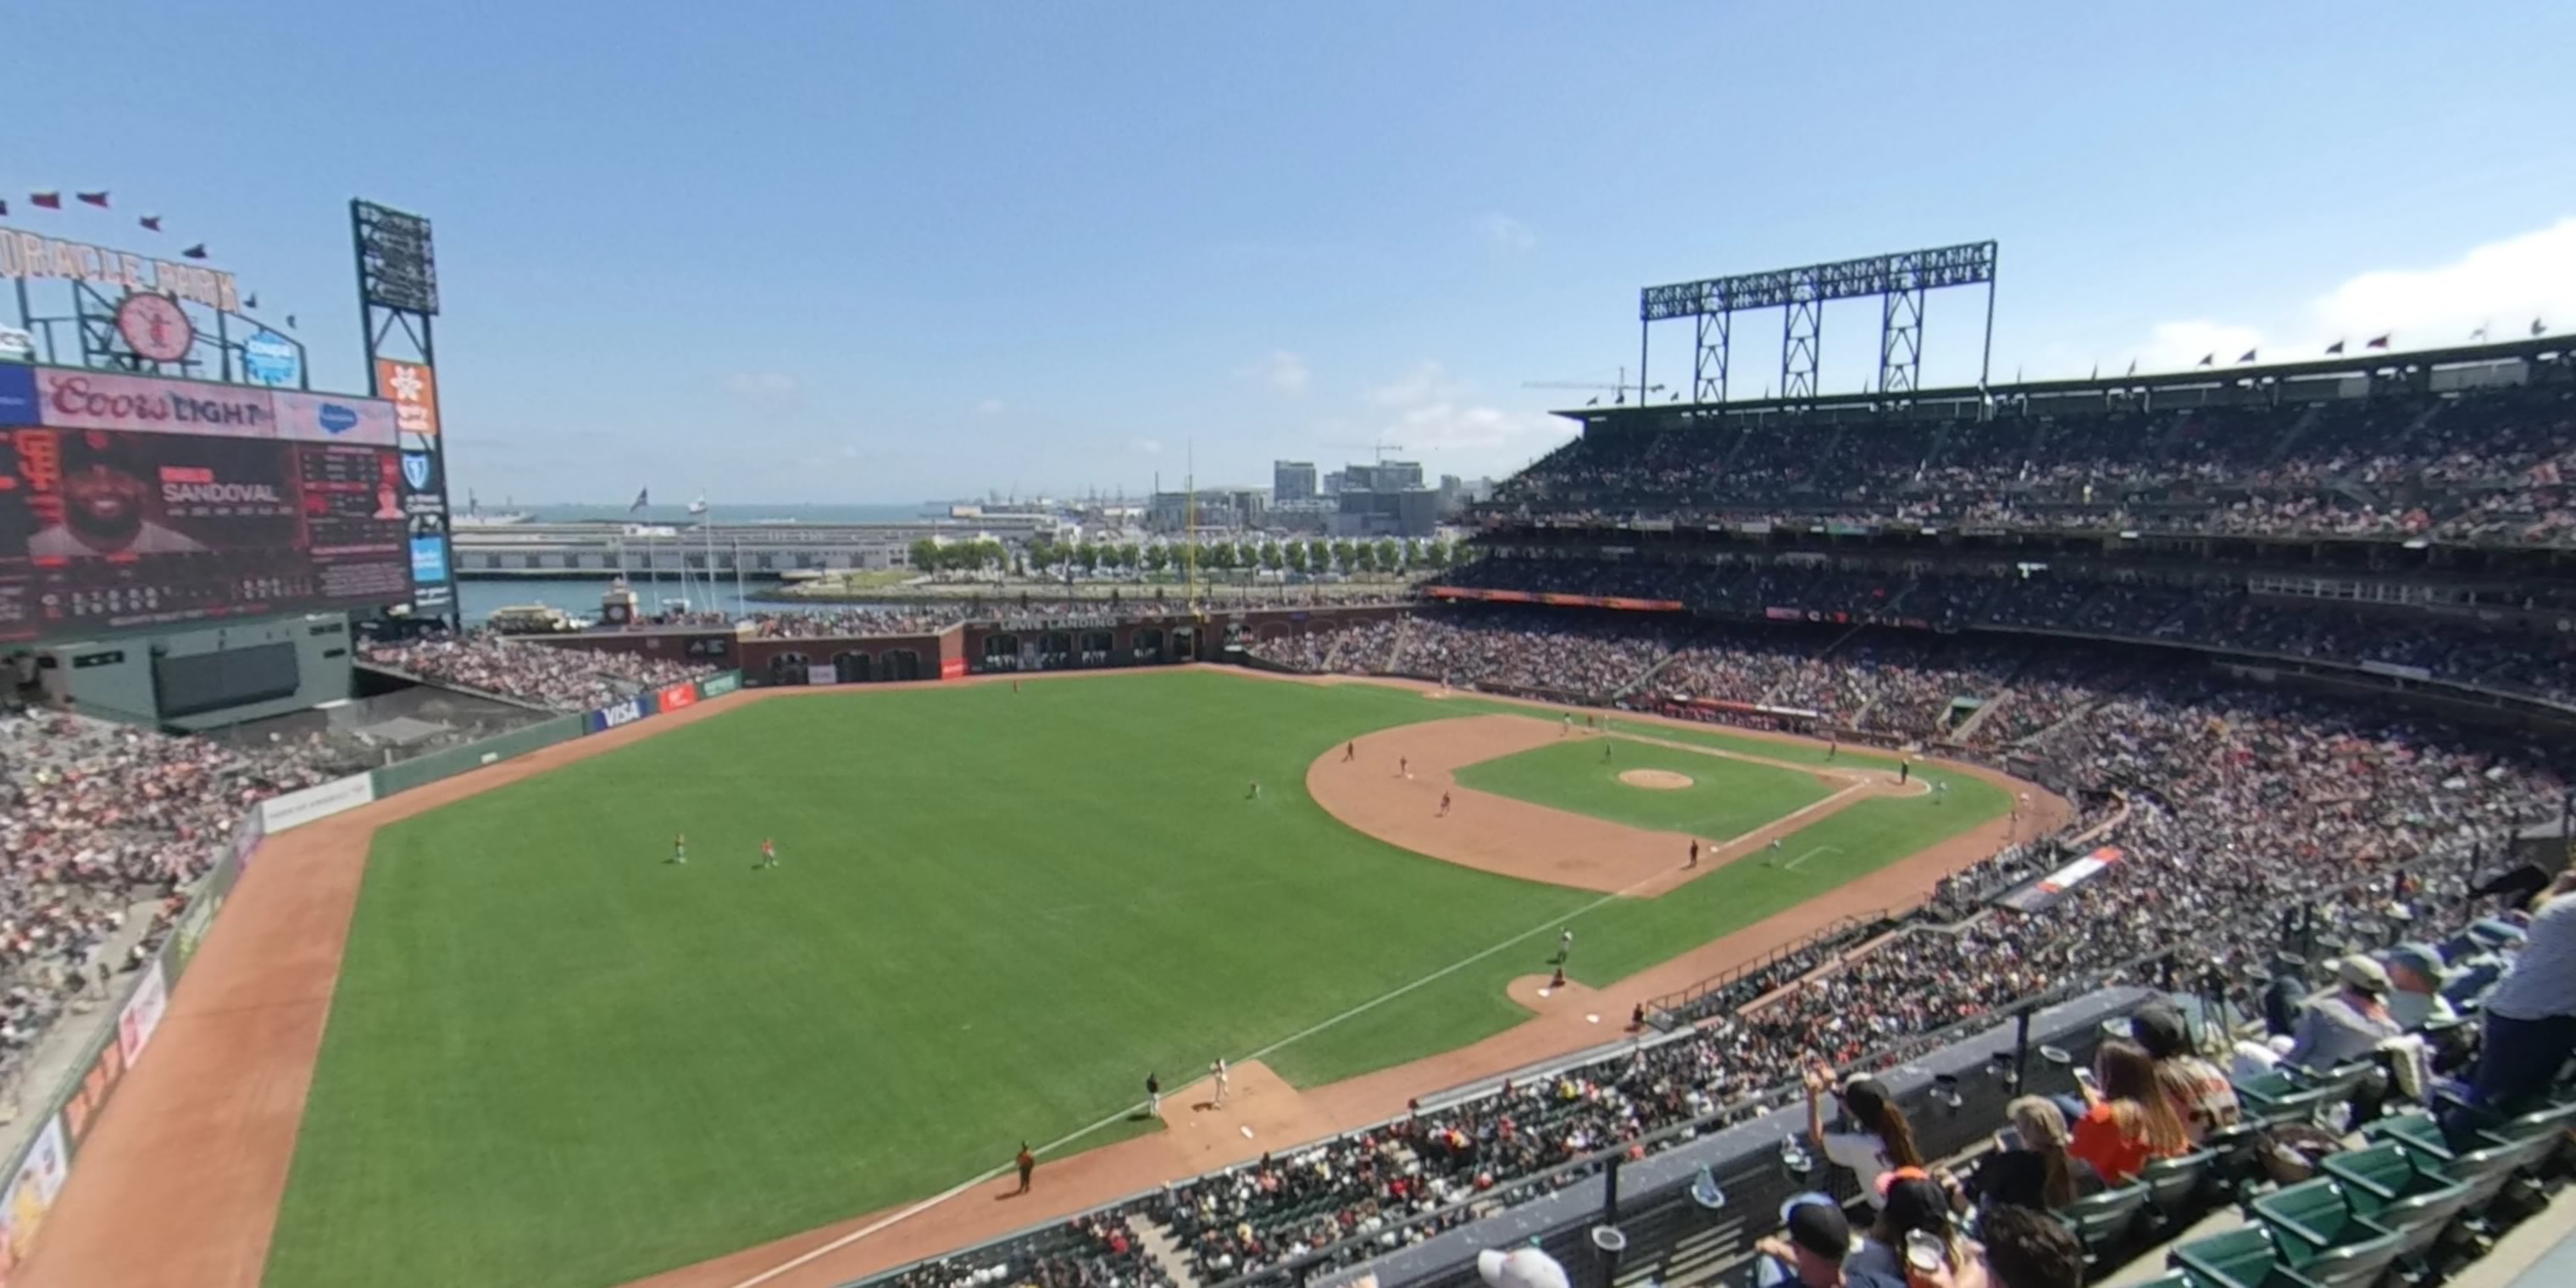 Section 331 at Oracle Park 